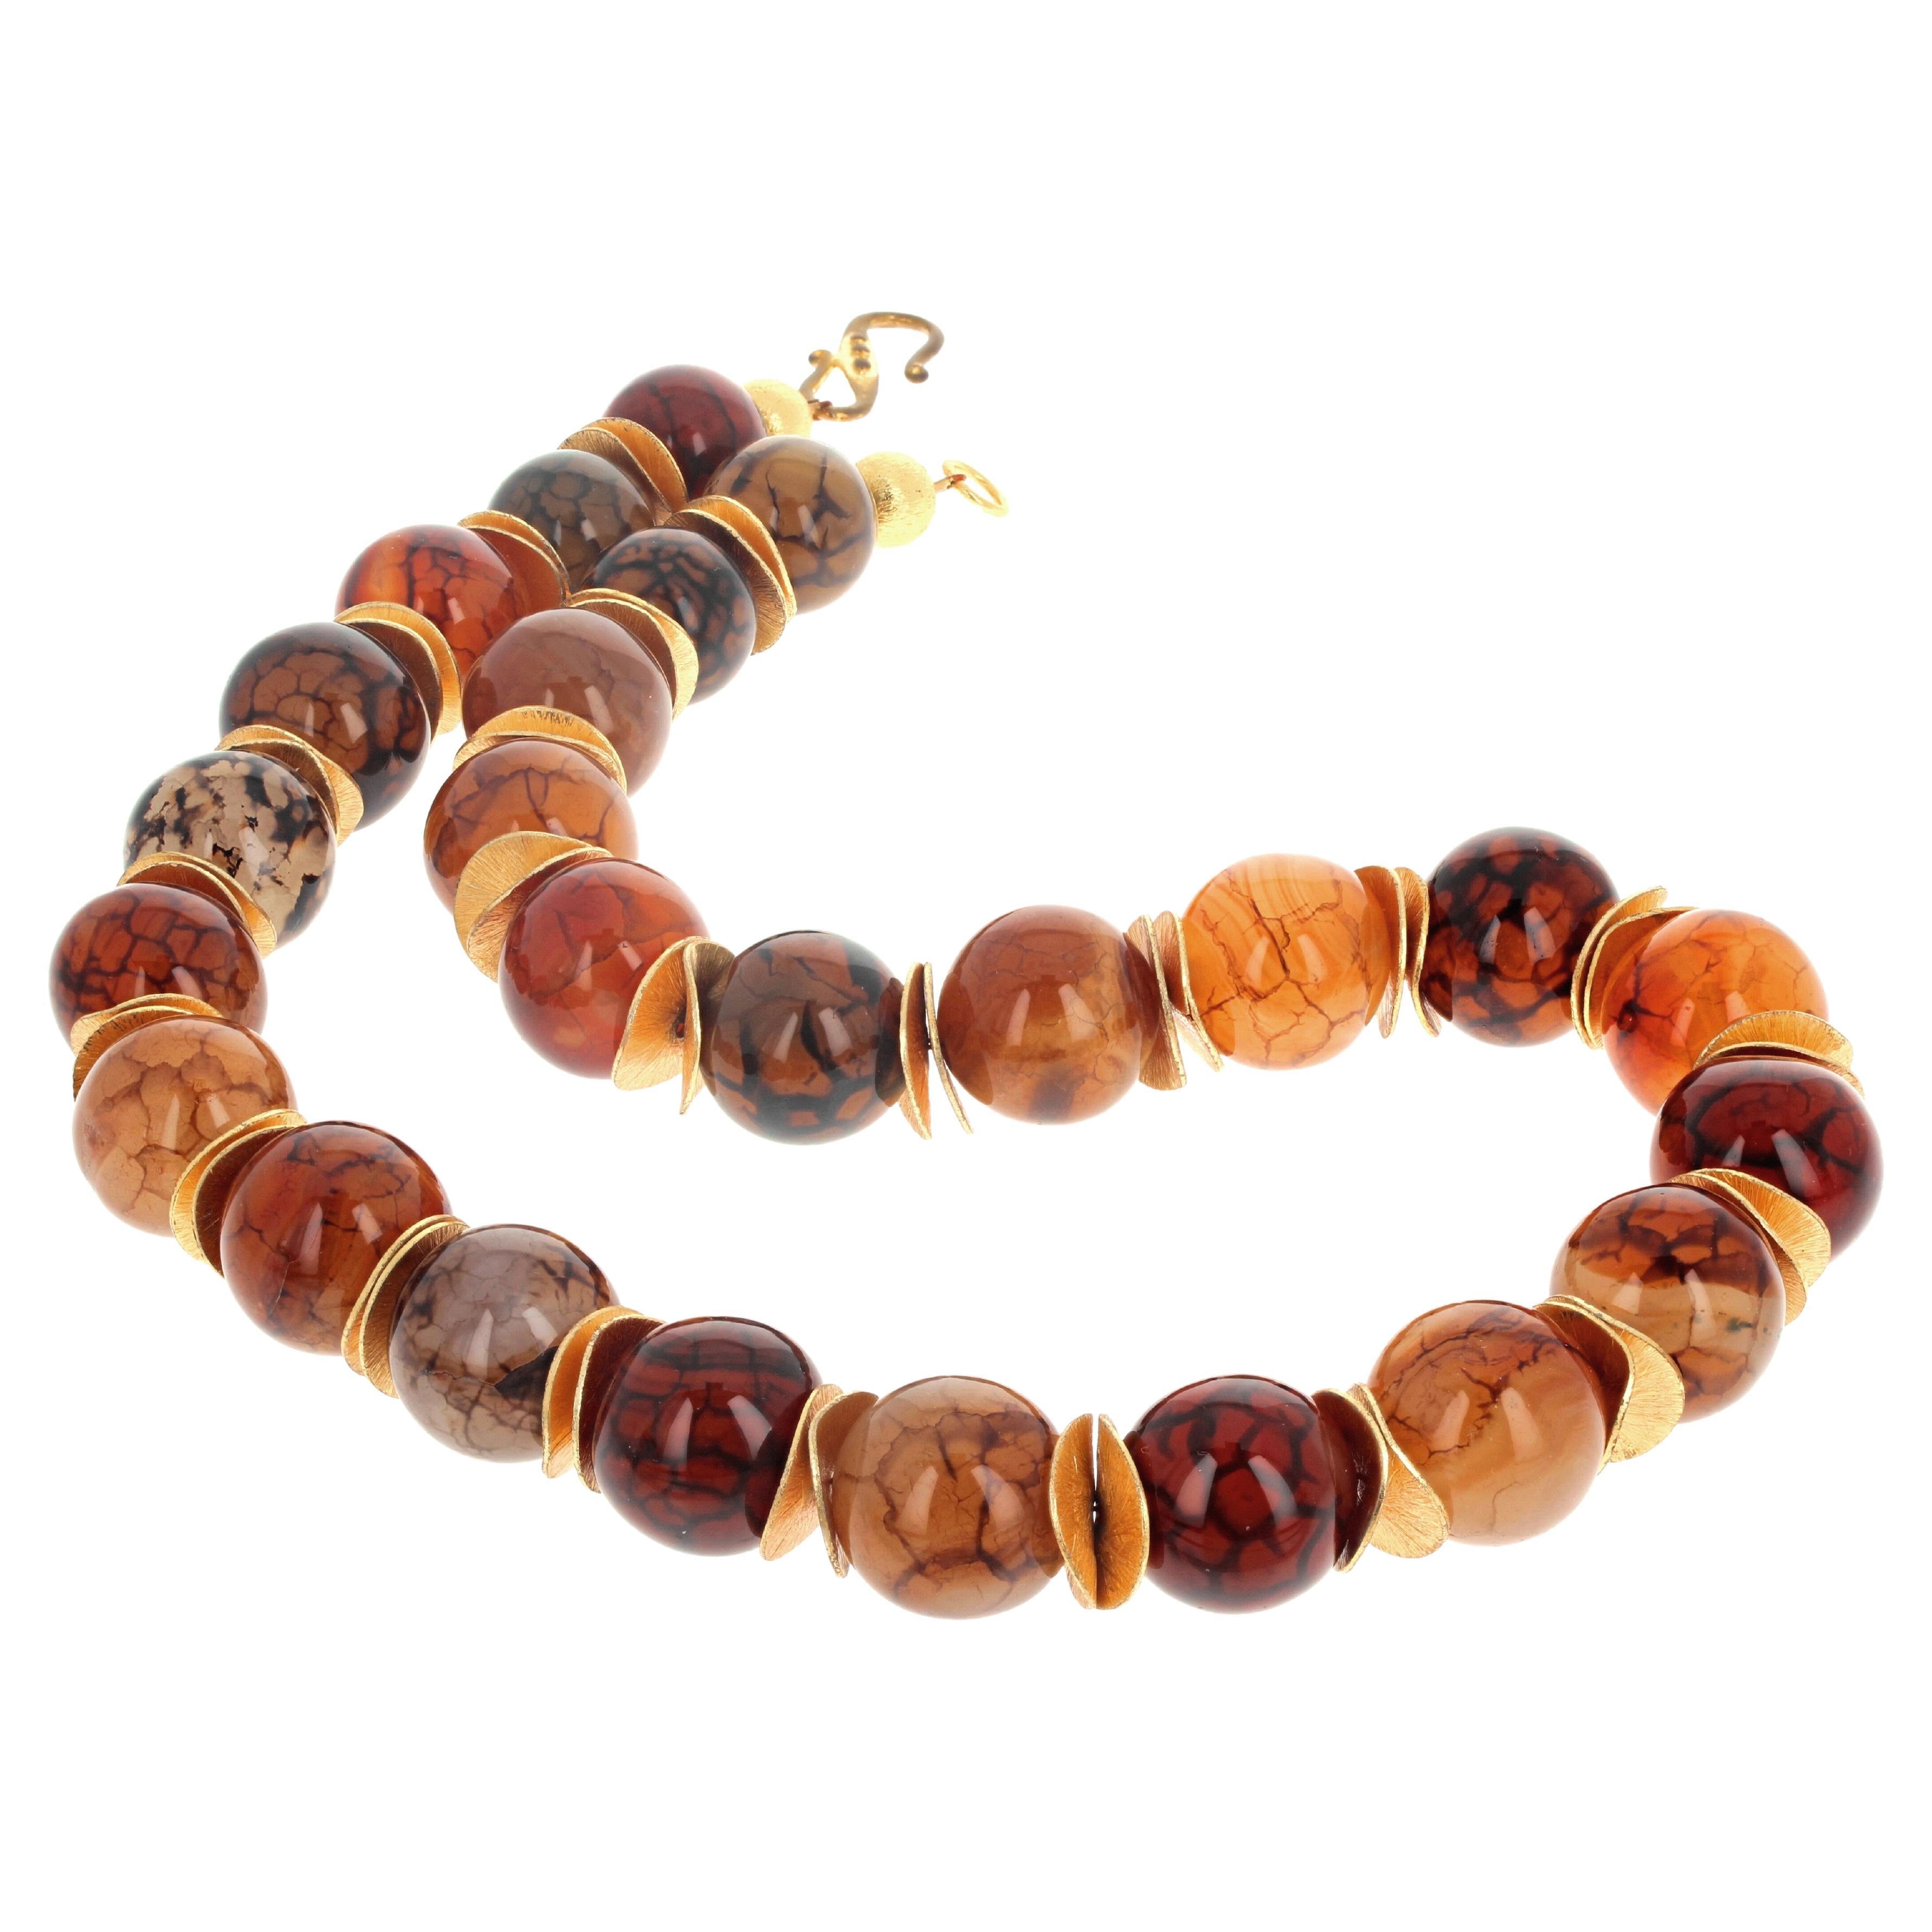 Gorgeous beautiful round natural Spiderweb Agates 18 1/2 mm in diameter with lovely gold plated petals.  This lovely necklace is 21 inches long and has an easy to use gold plated hook.  